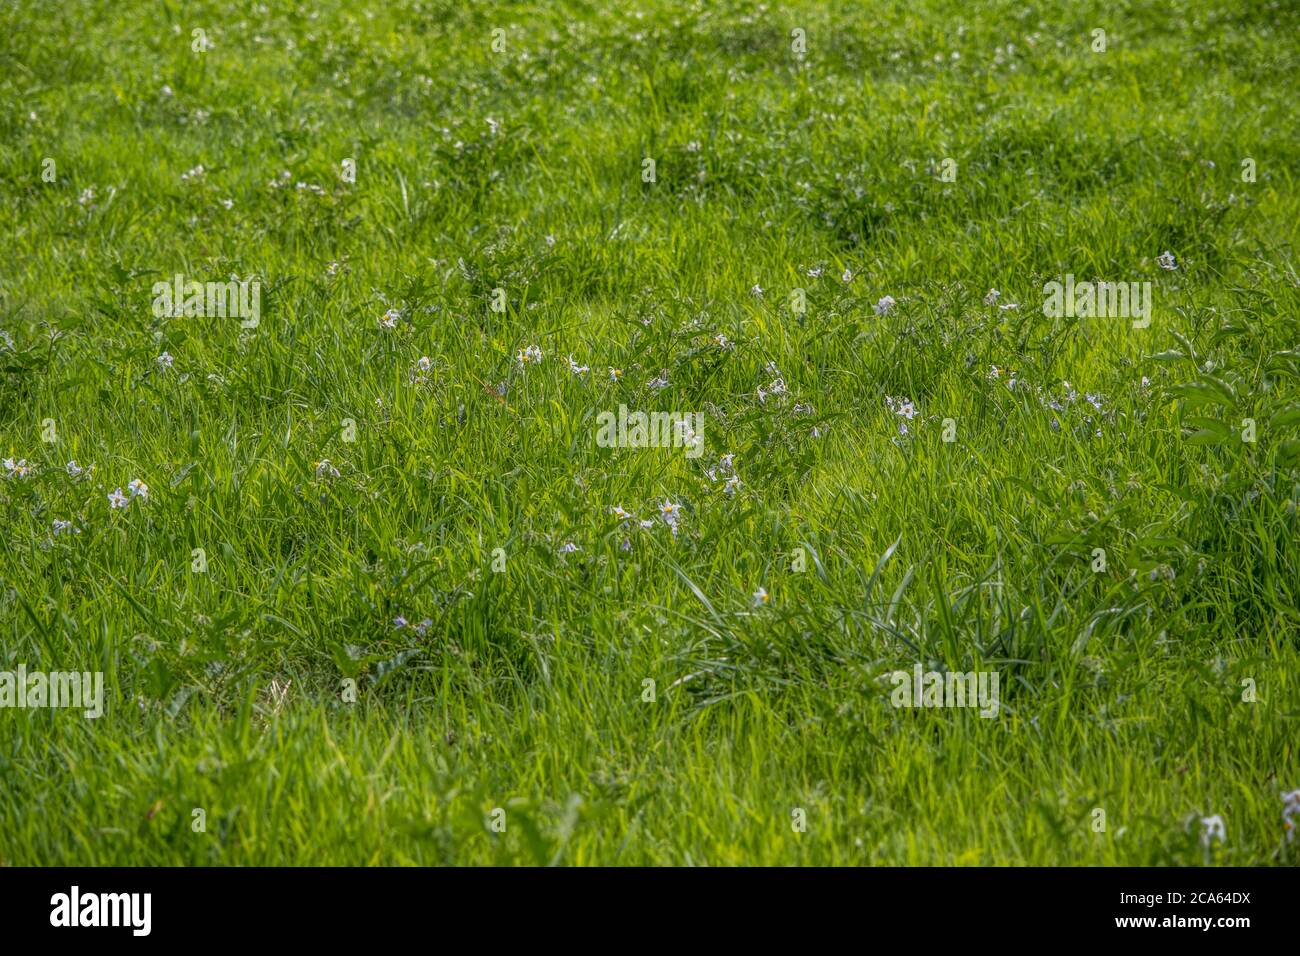 A field full of white flowering horse nettle plants which is an invasive weed that spreads and is toxic and has thorns growing among the grasses on a Stock Photo